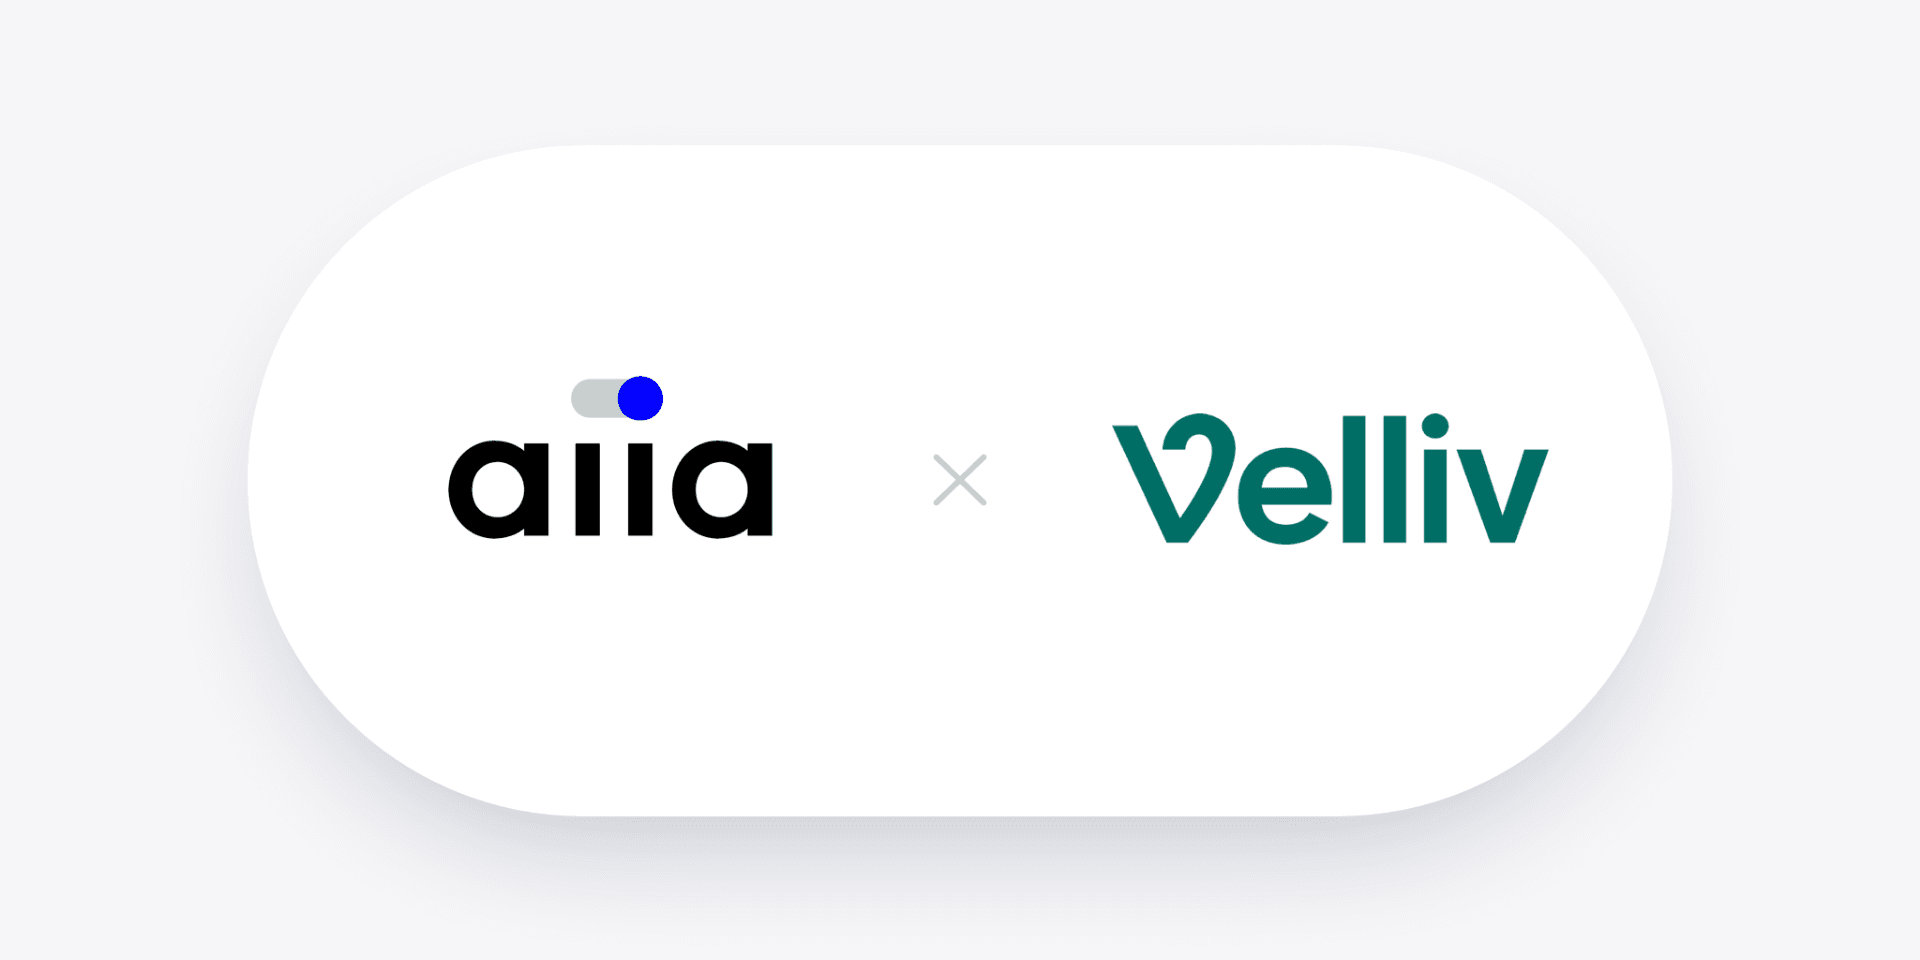 How pension fund Velliv pioneered open banking payments in Denmark